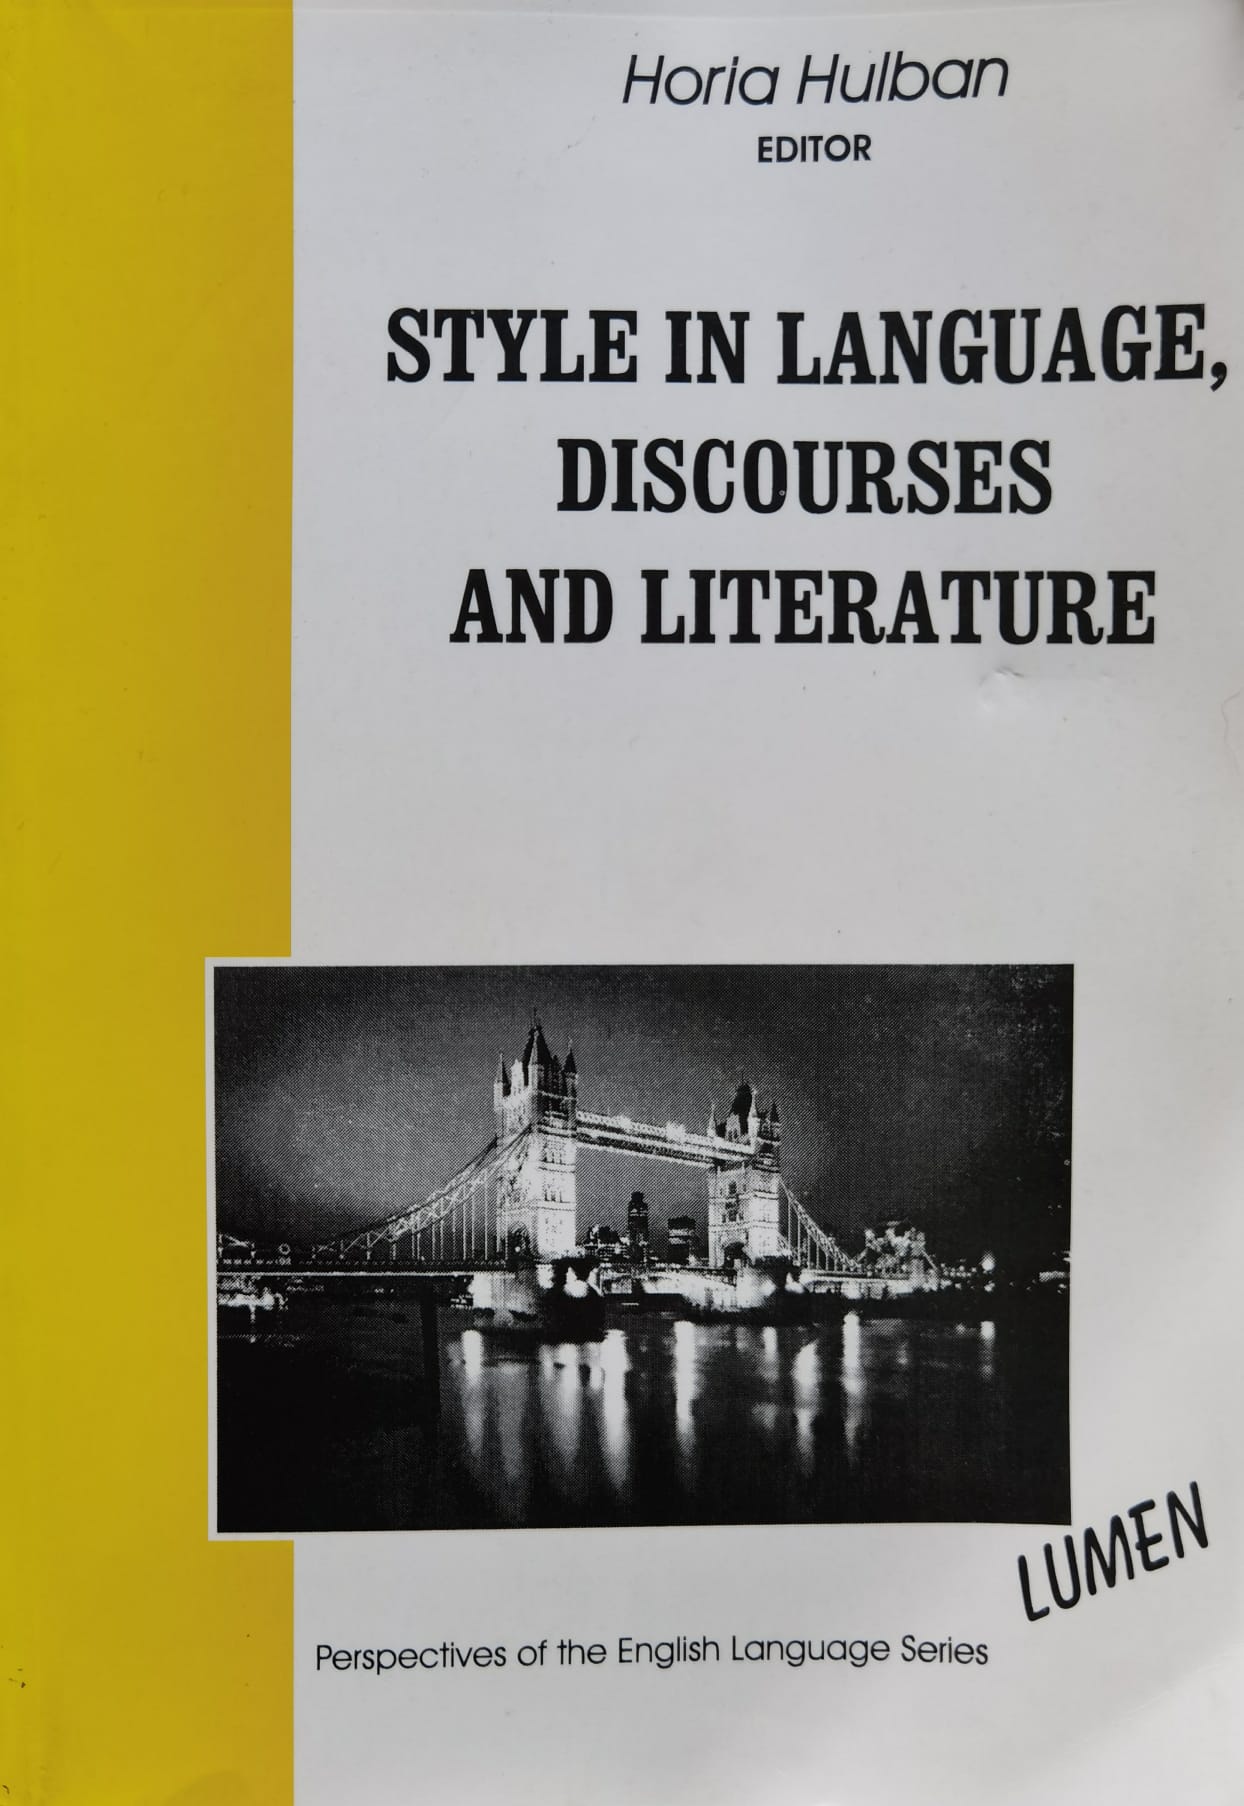 style in language, discourses and literature                                                         horia hulban                                                                                        